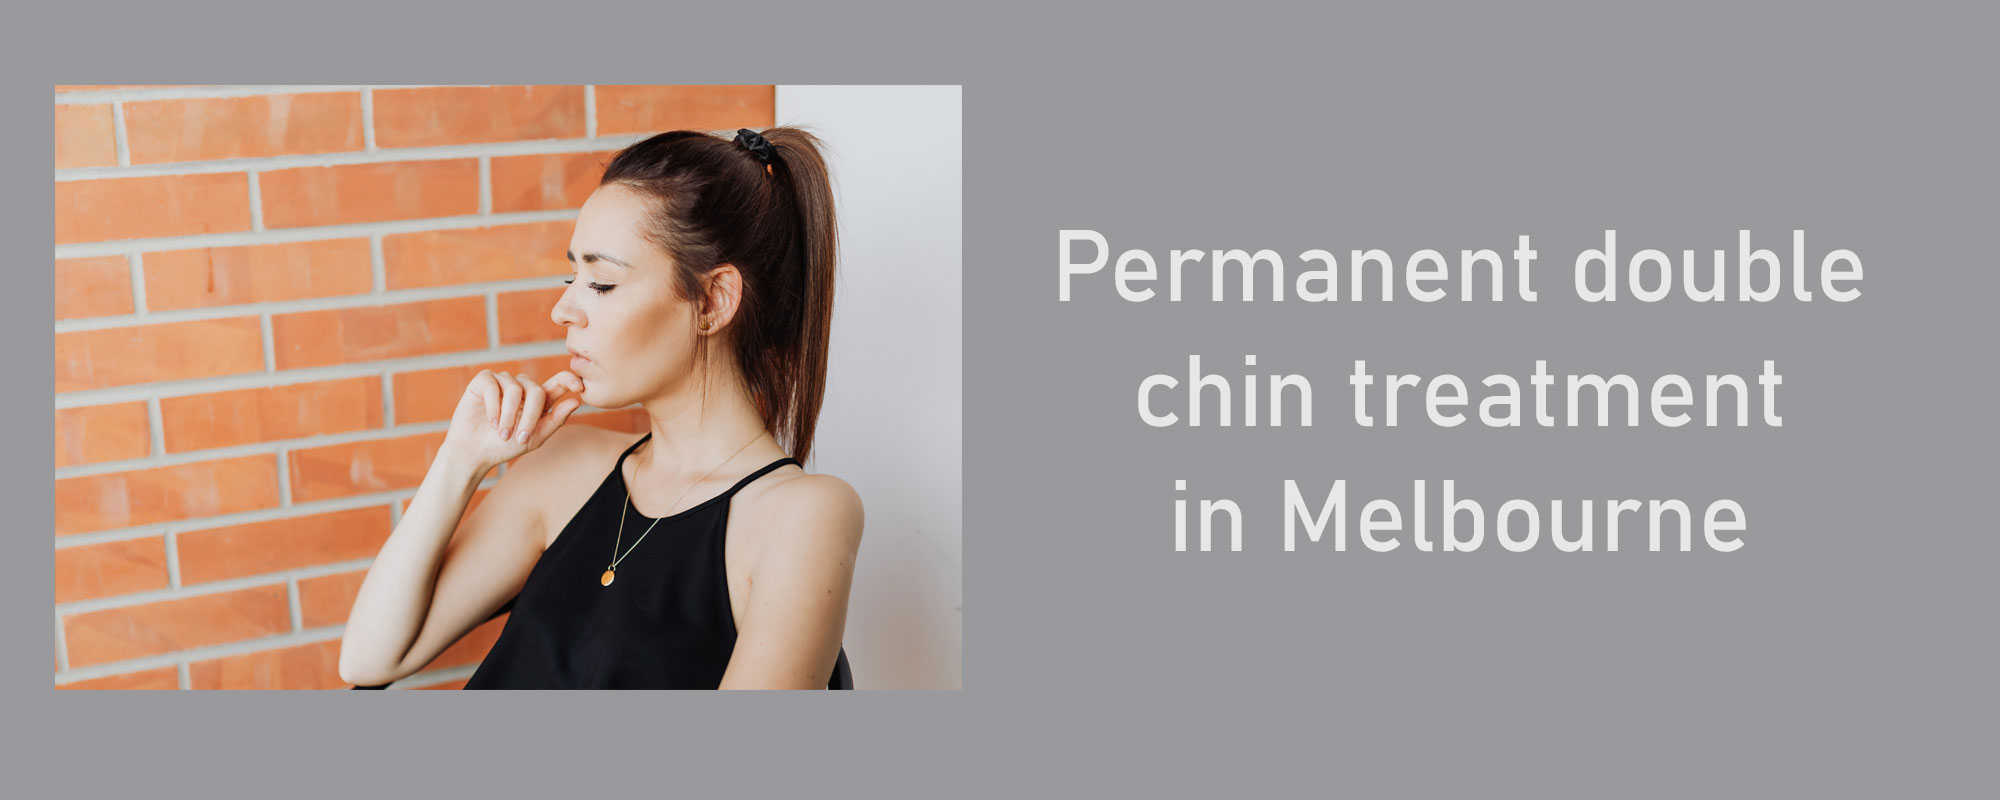 Permanent double chin treatment in Melbourne - 1